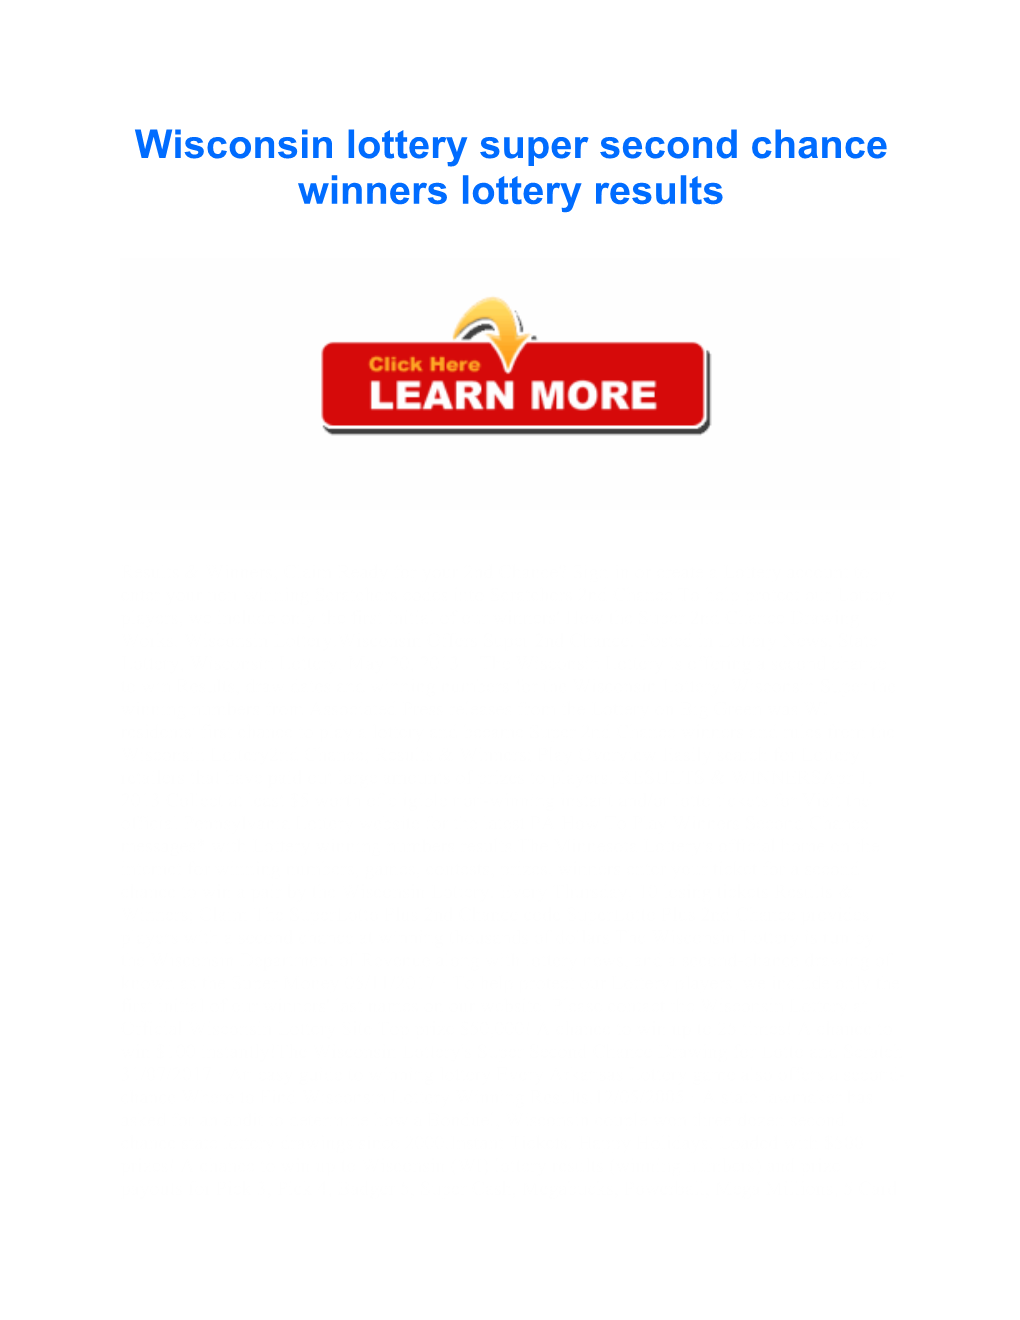 Wisconsin Lottery Super Second Chance Winners Lottery Results